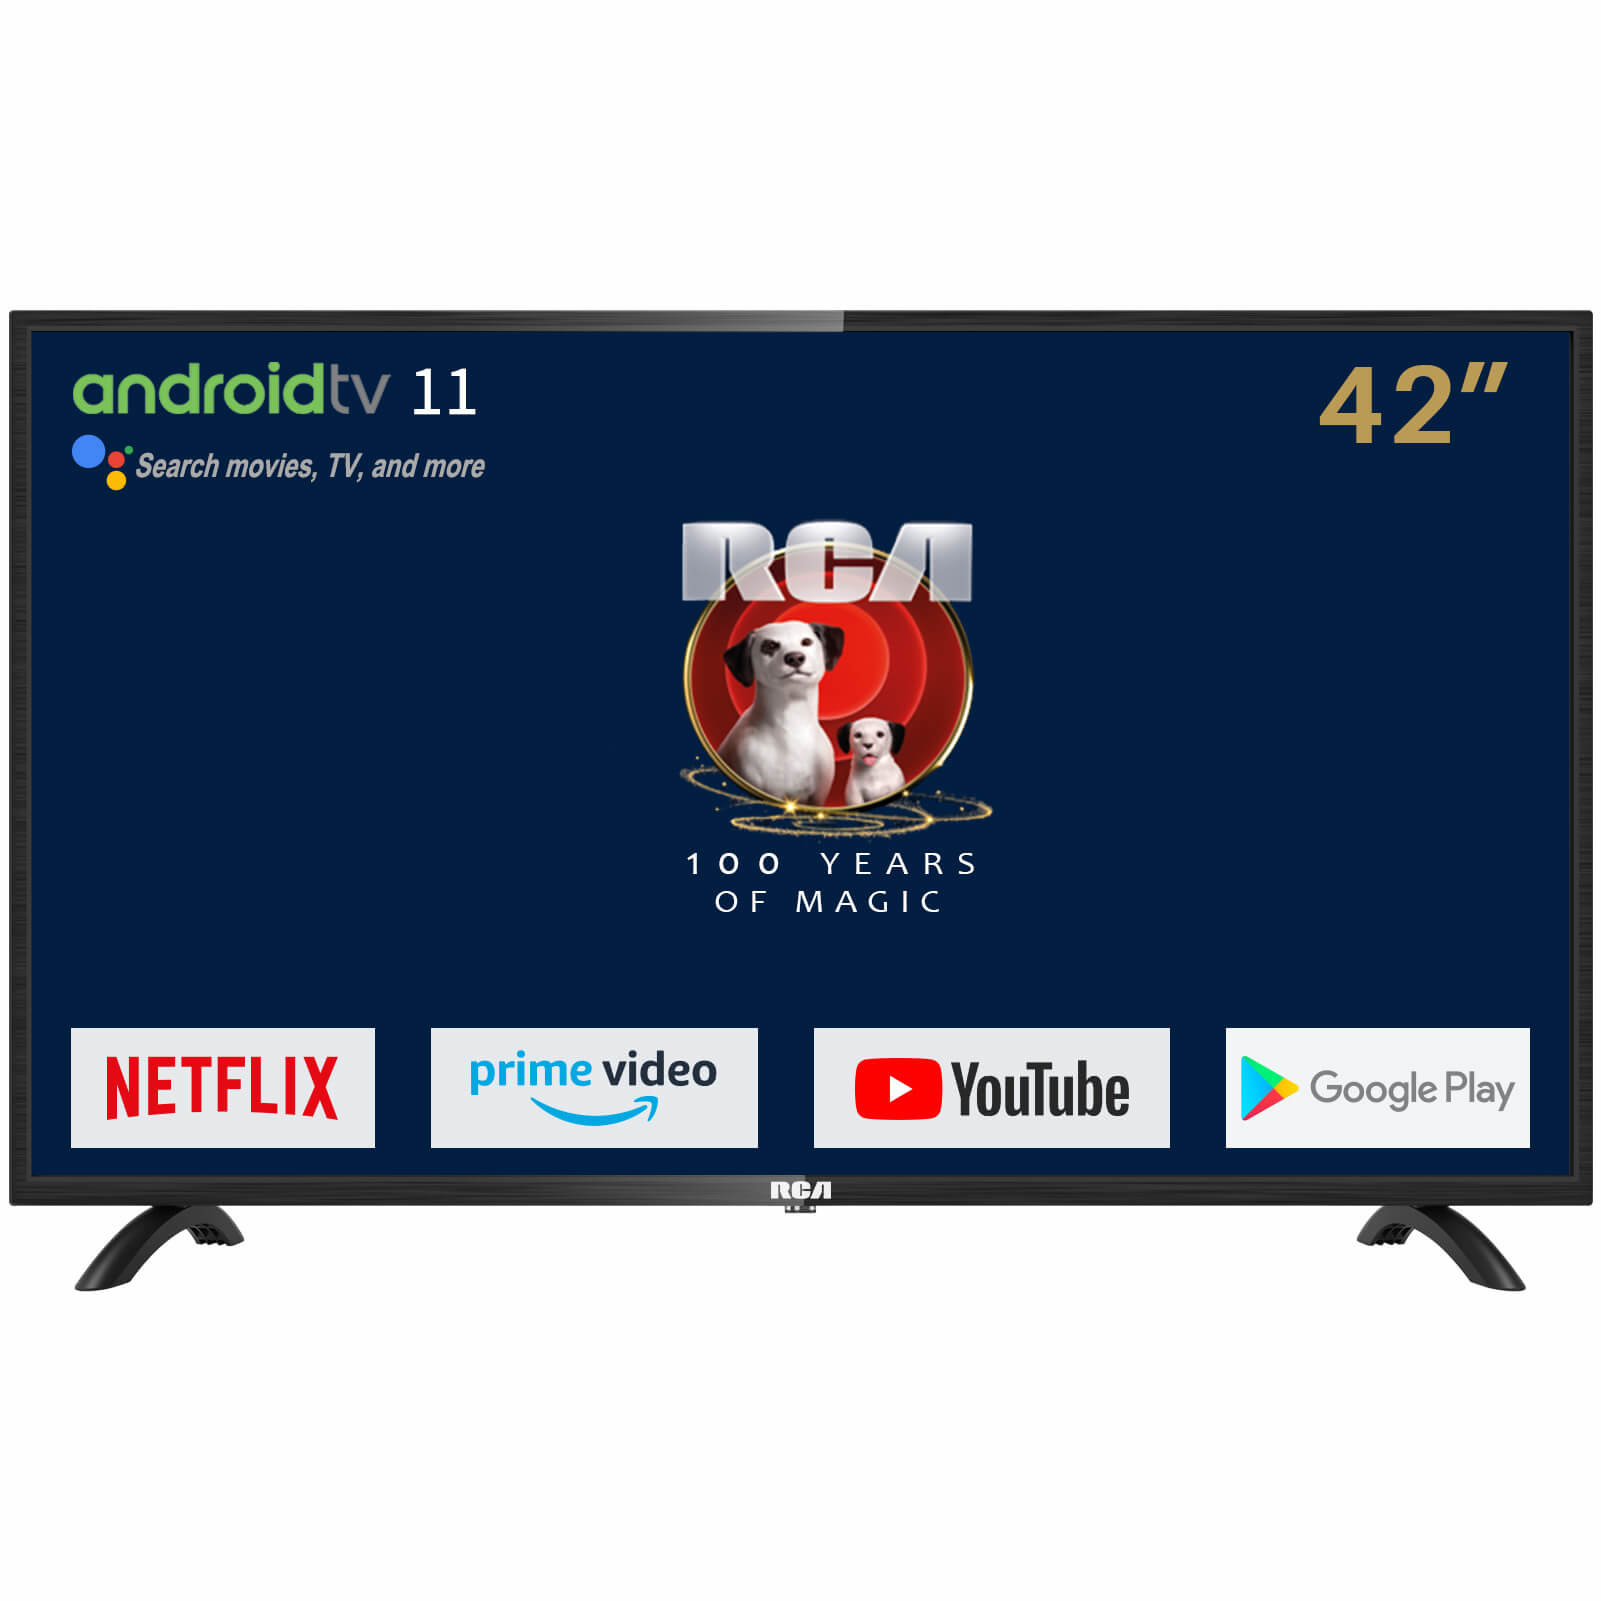 RCA ANDROID TV RS42F3 - AntteQ Group B.V.